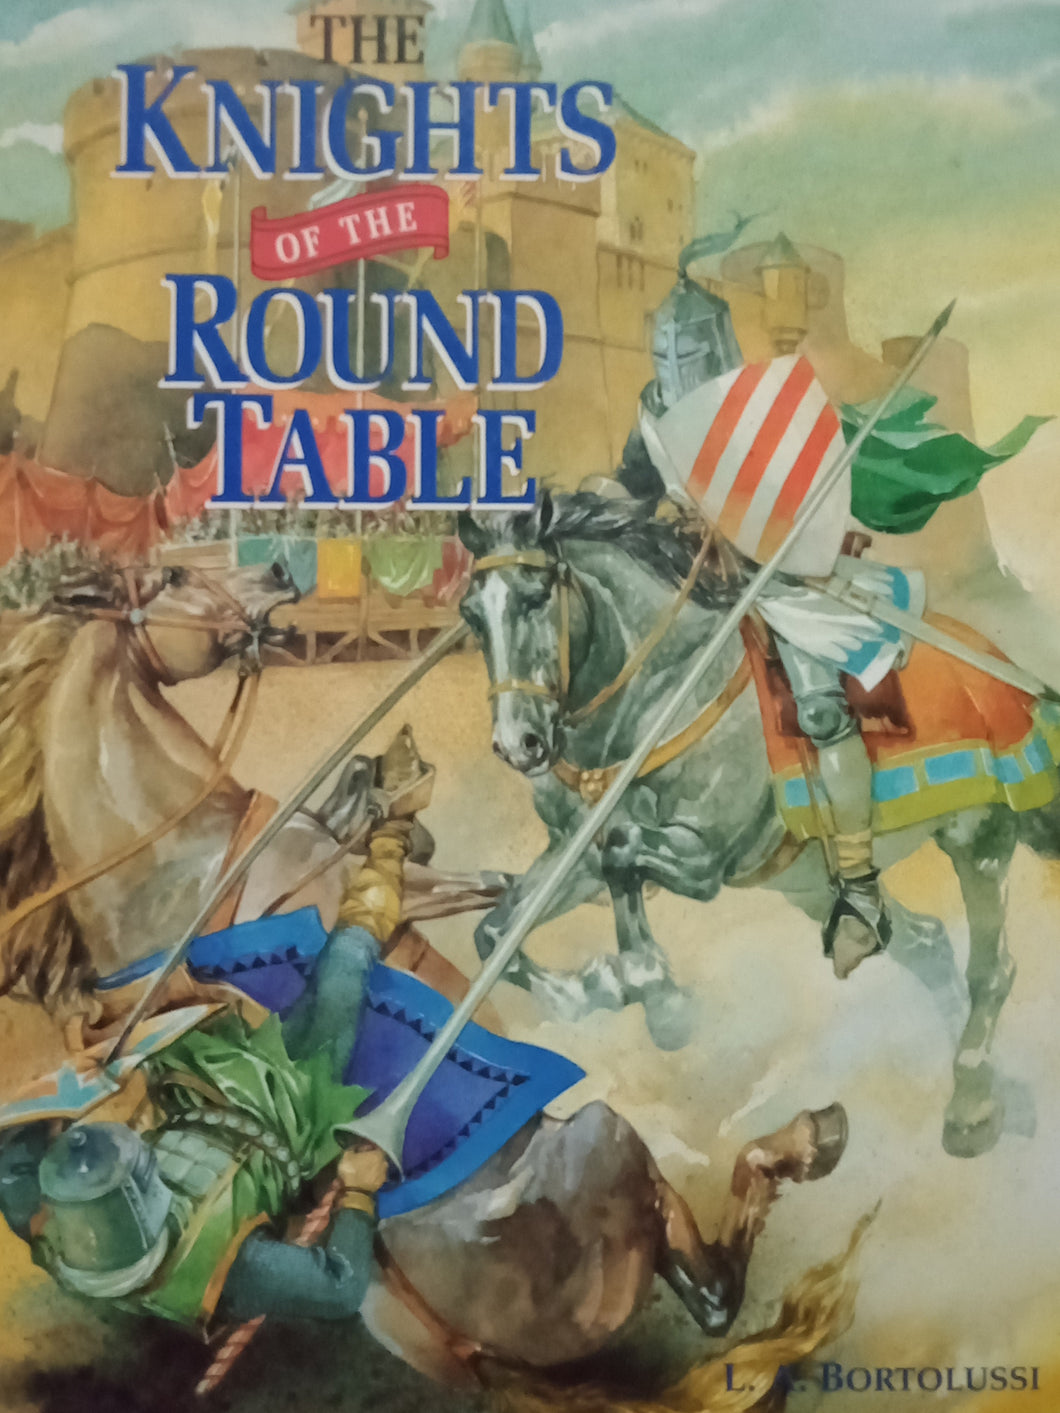 The Knights Of The Round Table by L.A. Bortolussi